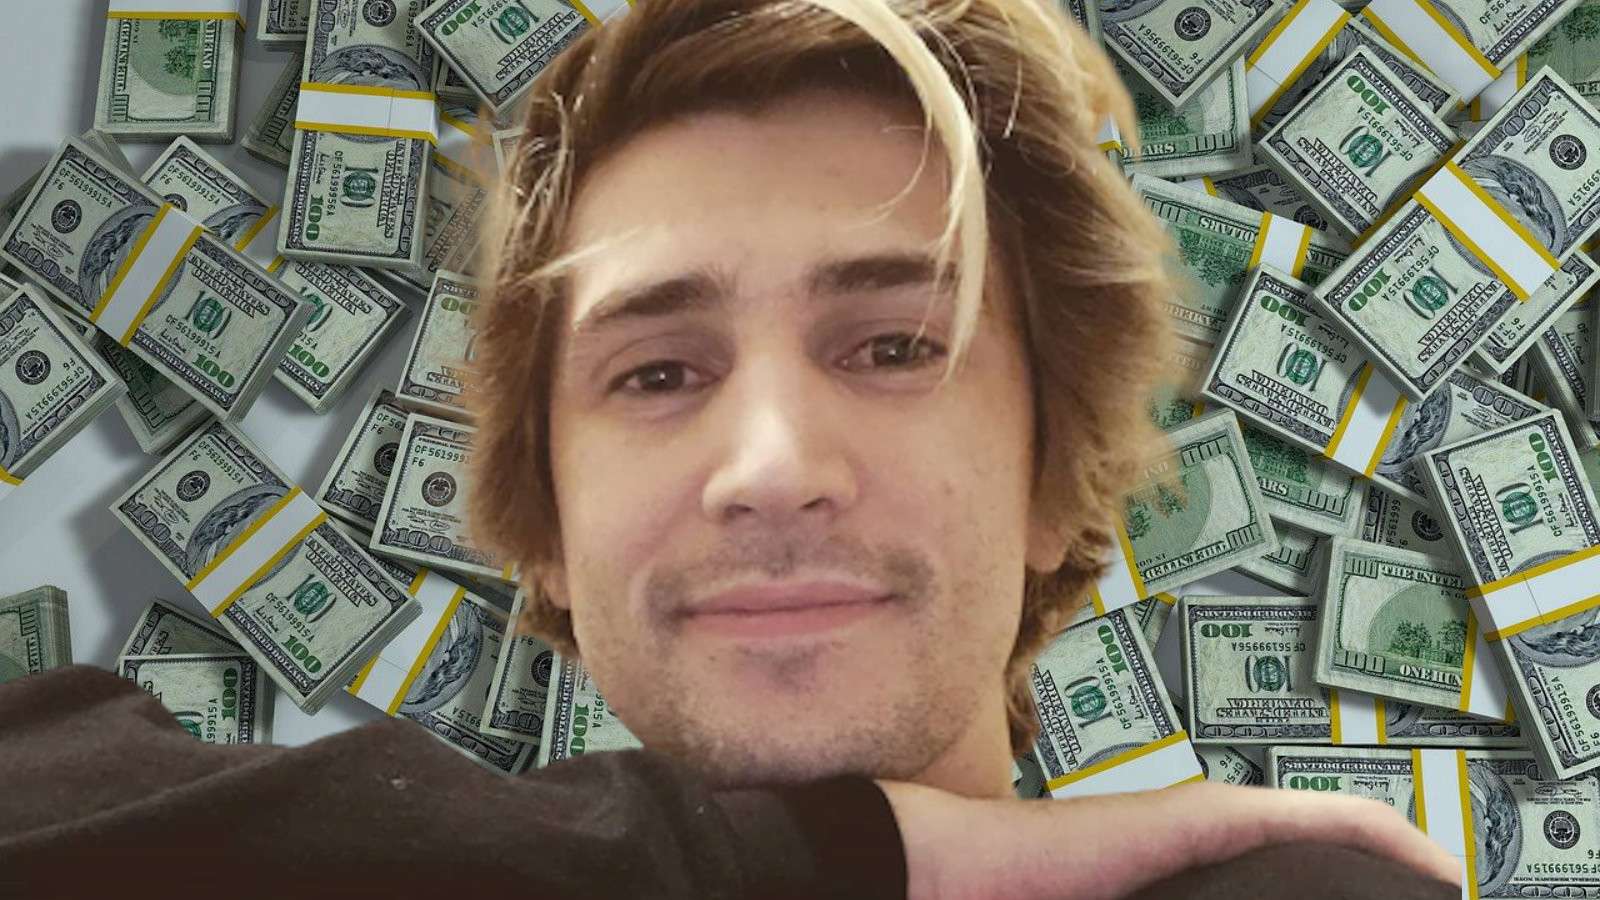 xqc in front of money